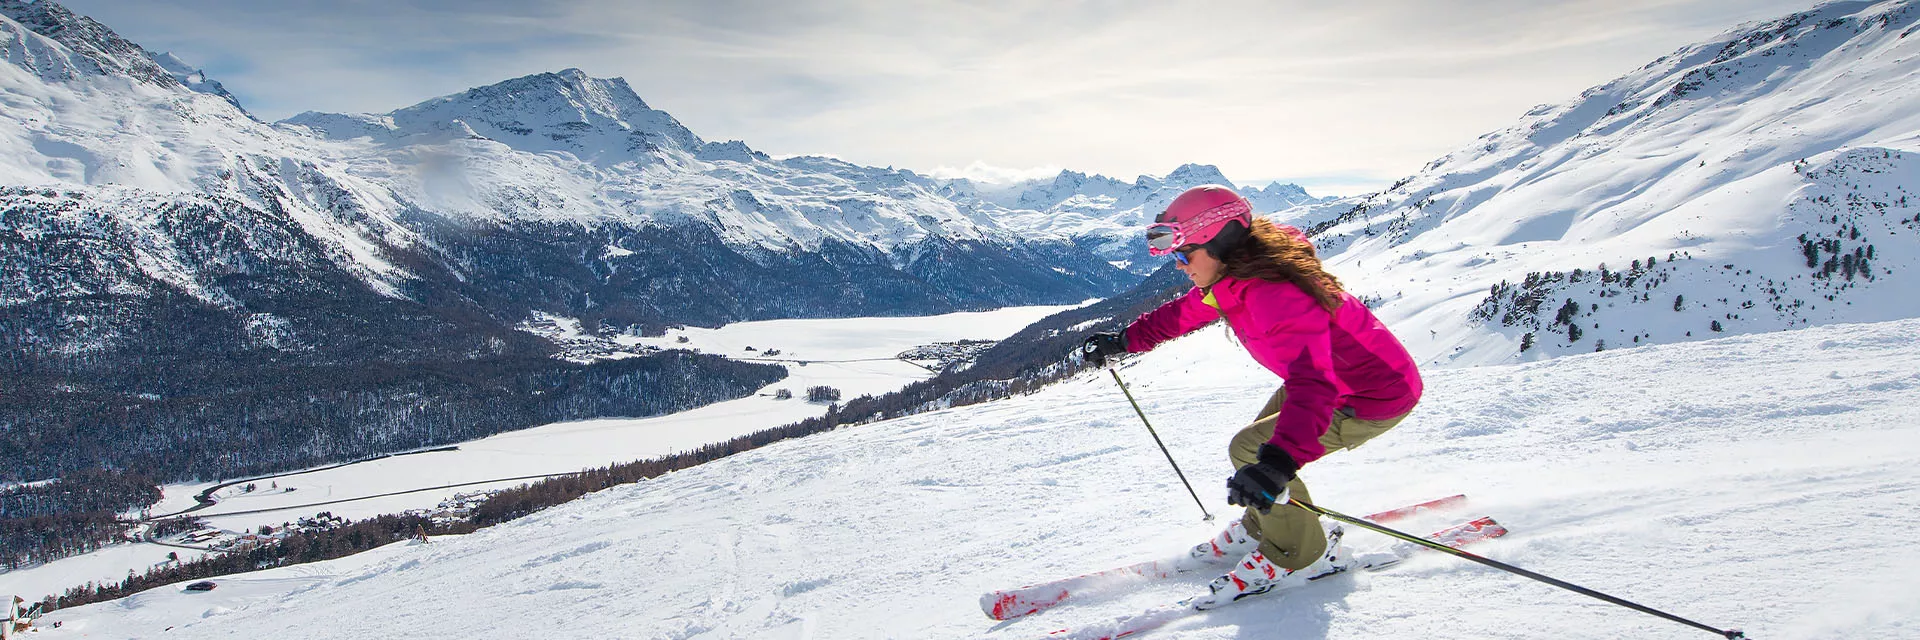 Your February ski vacations